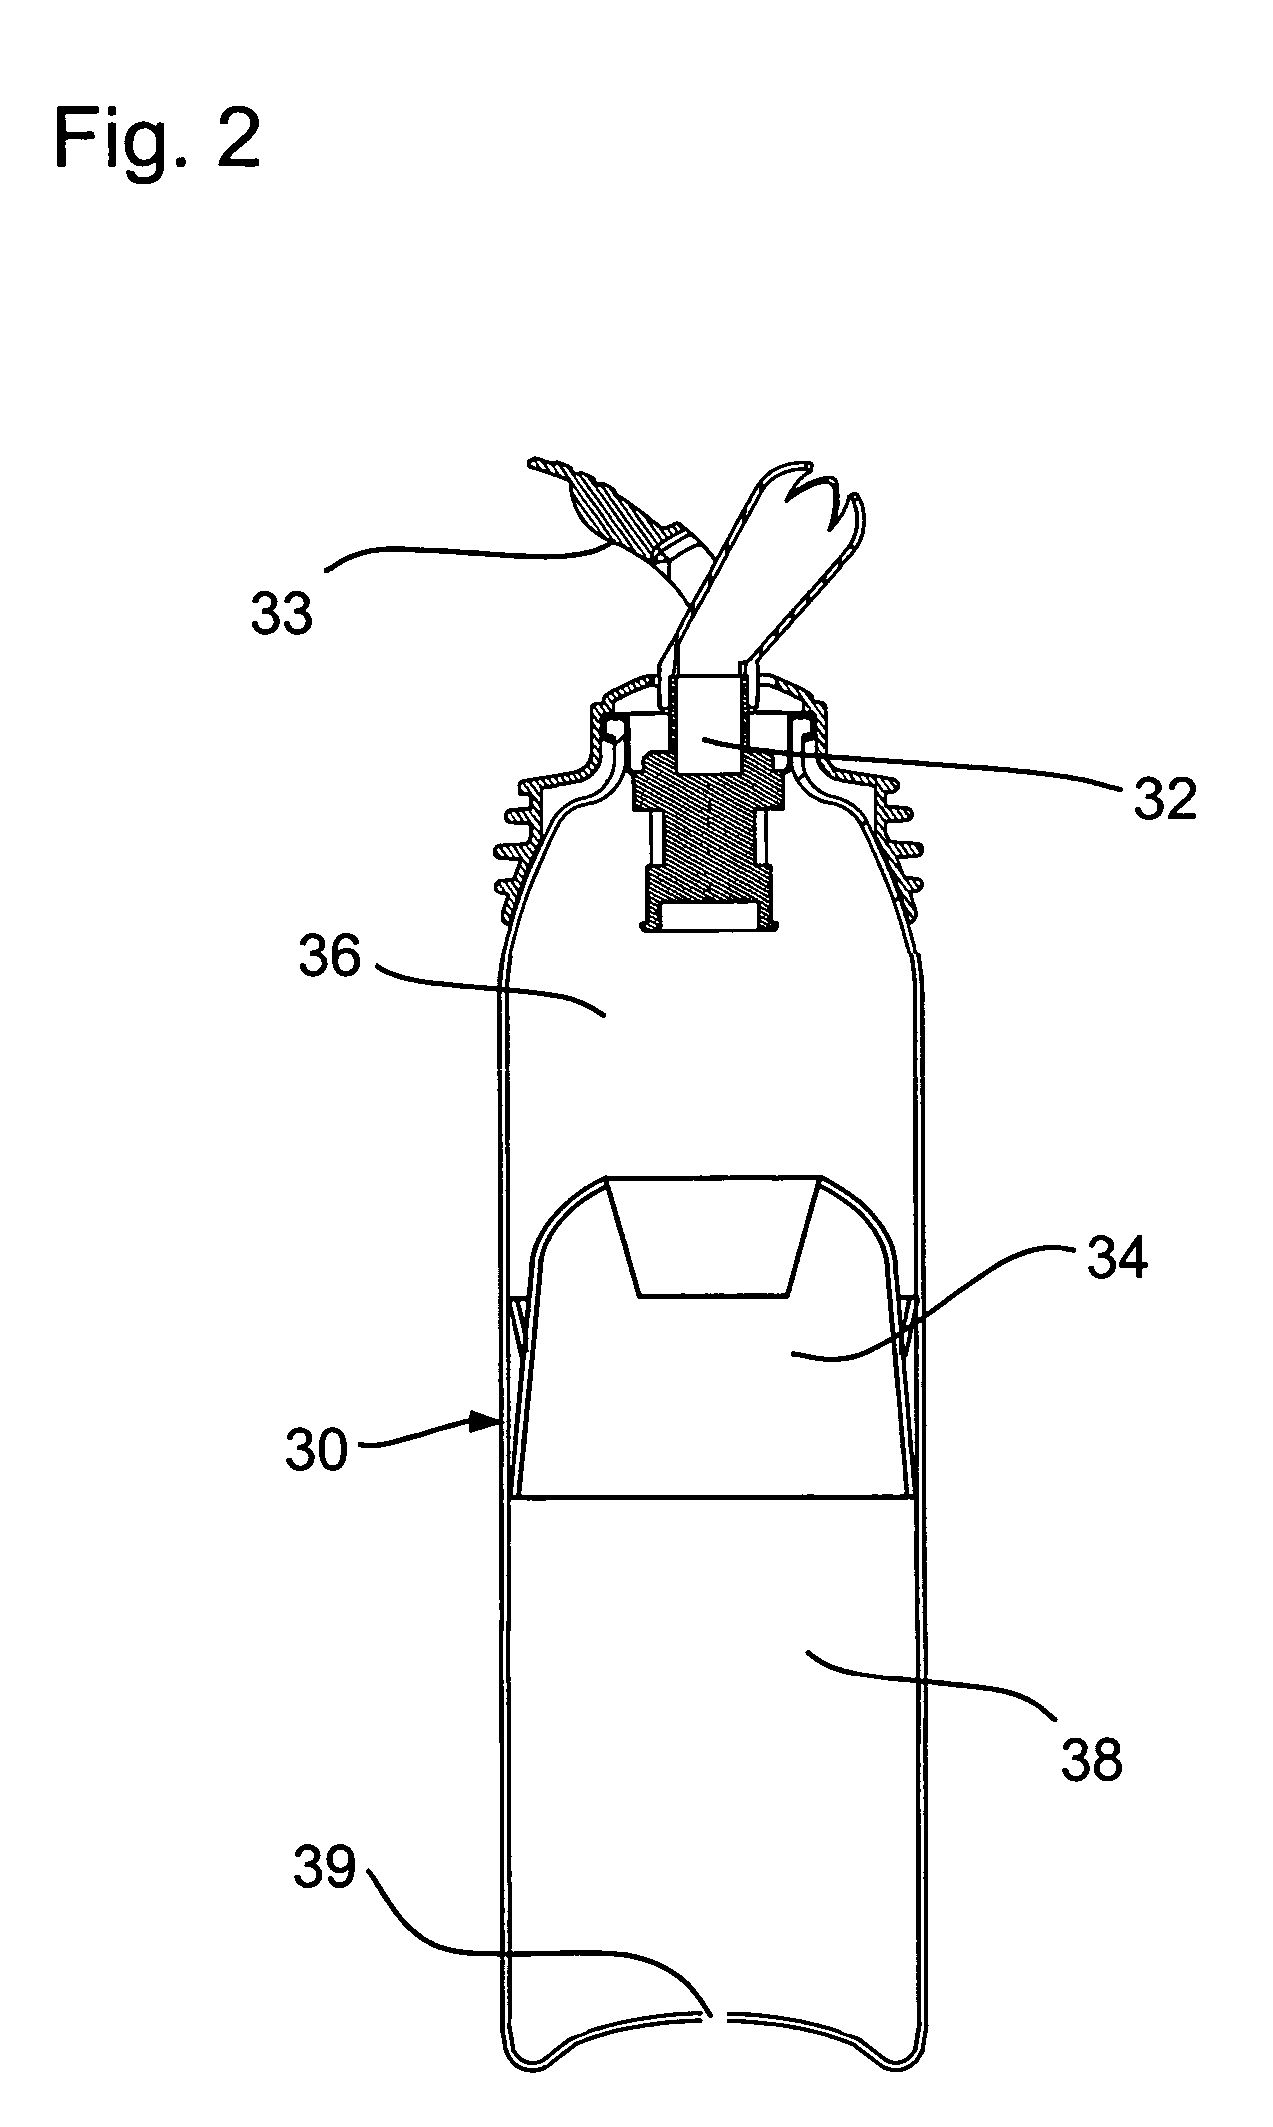 Frozen aerated product in a container and a valve for dispensing such